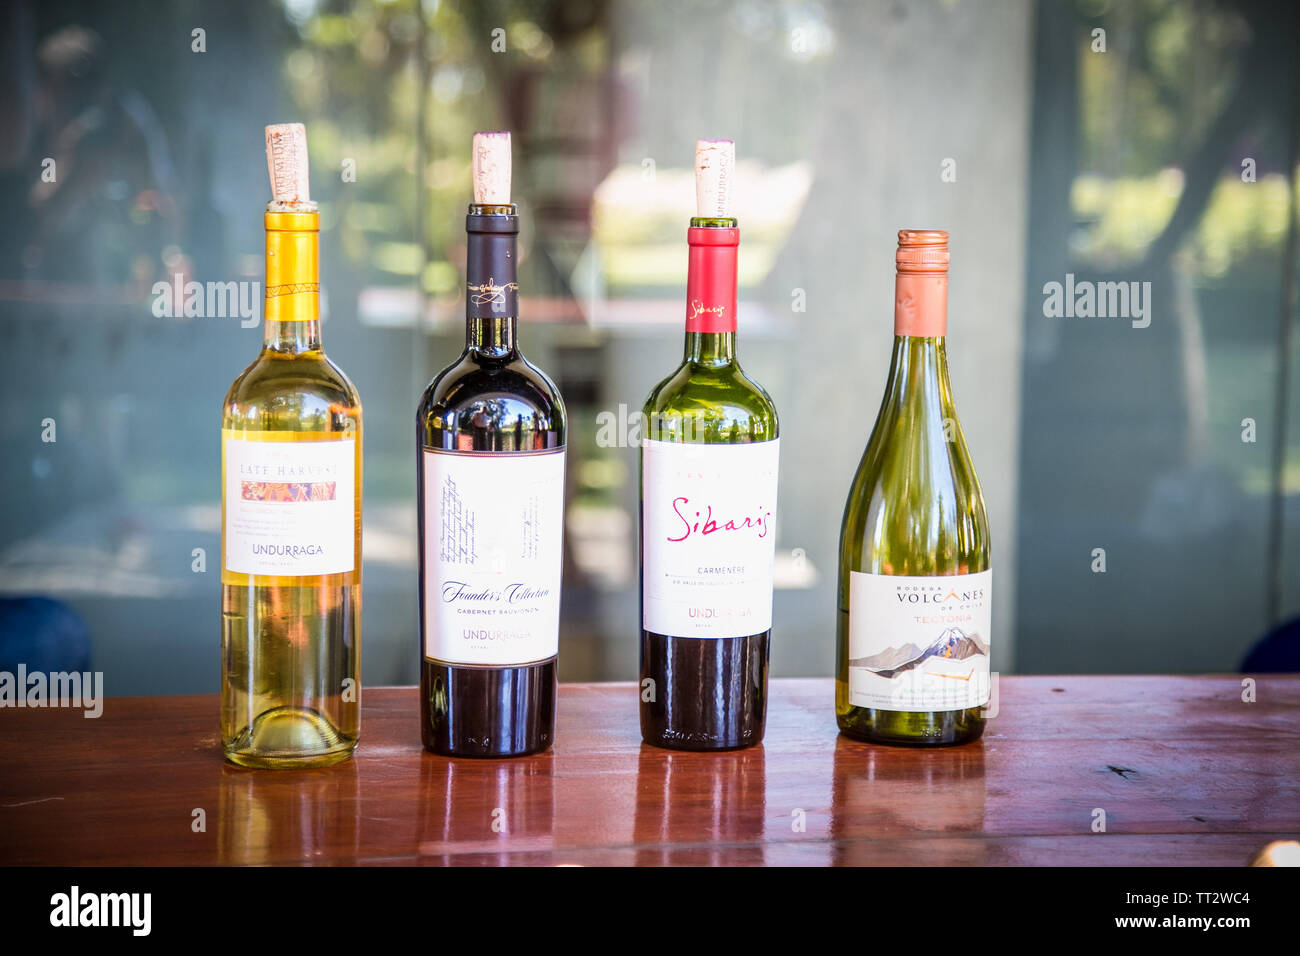 Talagante, Chile - Dec 29, 2018: The bottles of the famous wine in winery Vina Undurraga, Talagante , Chile.  The foundation was established in 1885 b Stock Photo